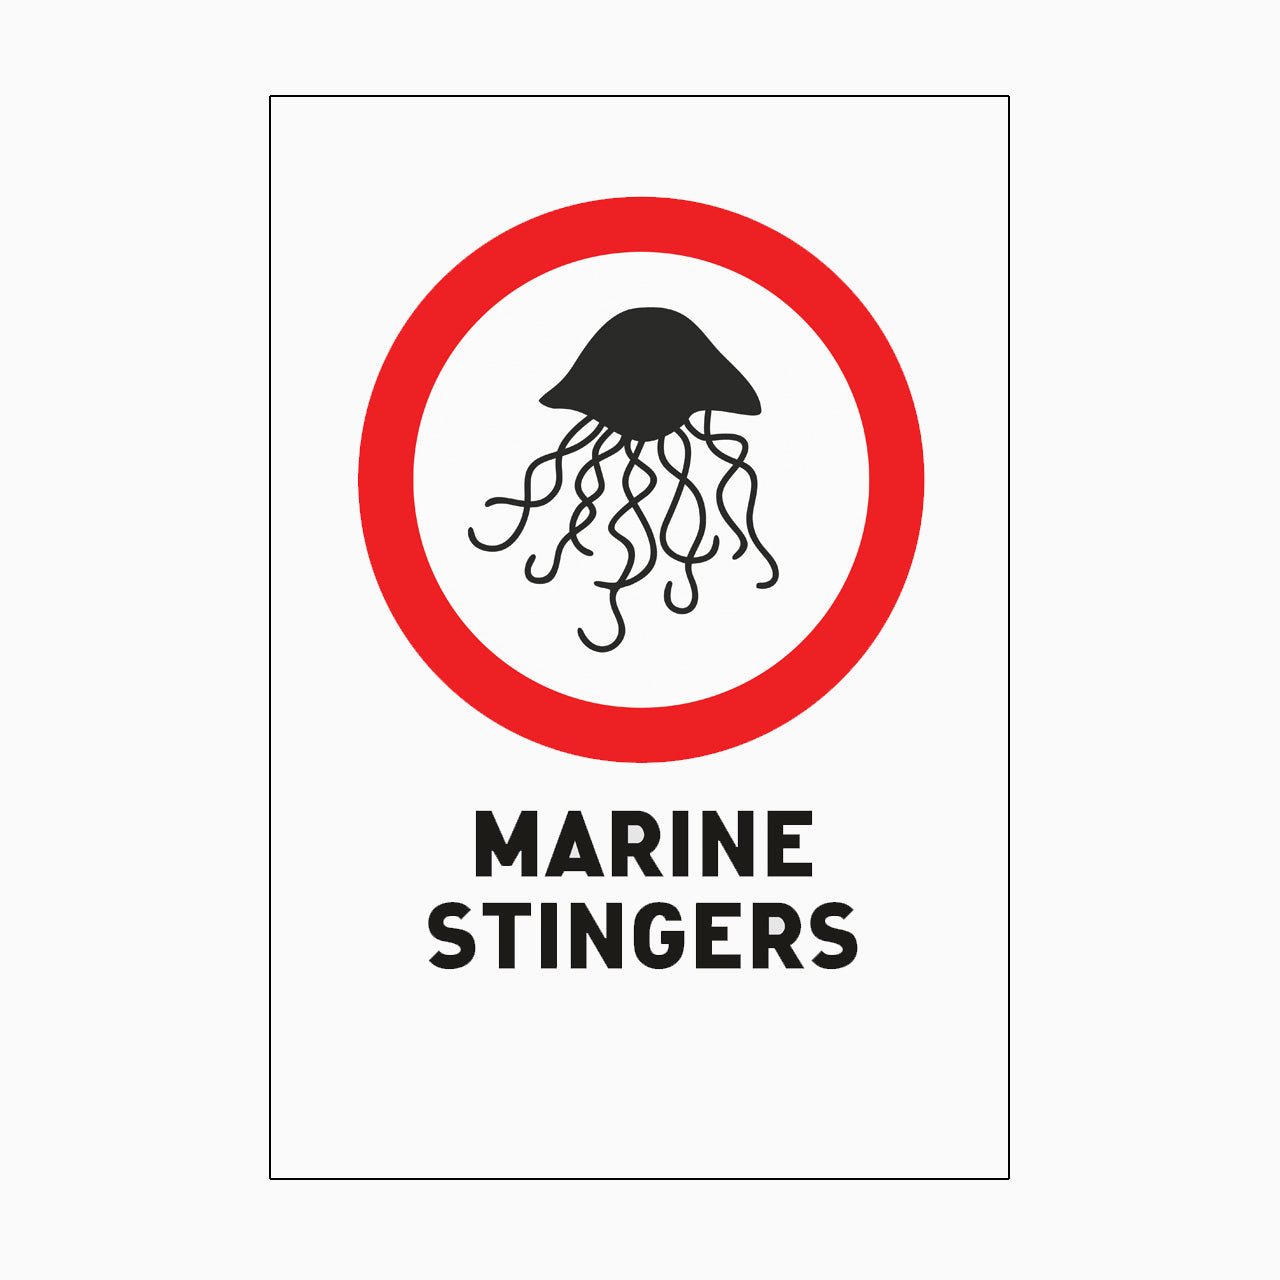 MARINE STINGERS SIGN - WATER SAFETY SIGN